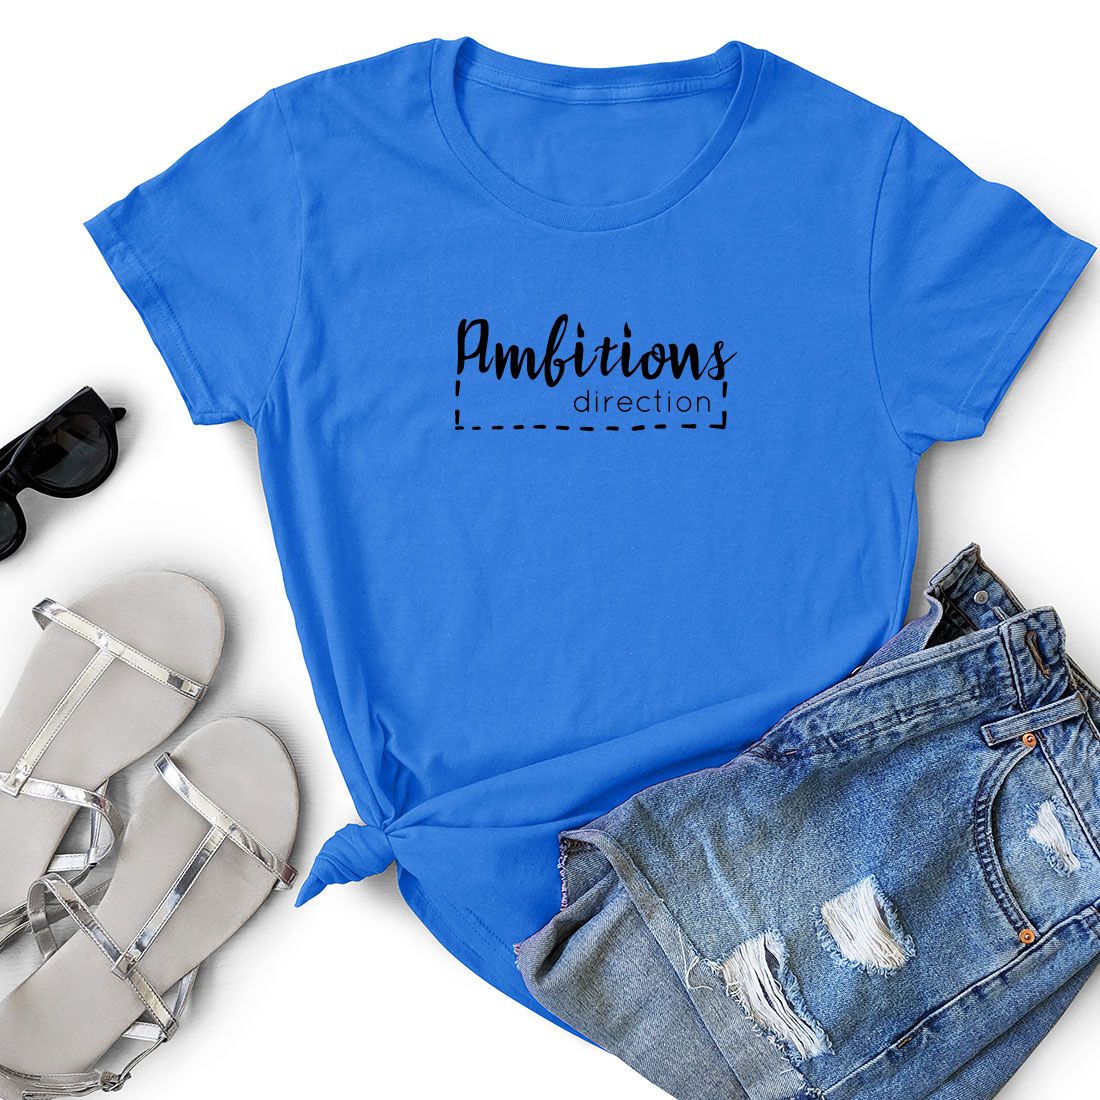 T - shirt that says ambitious.